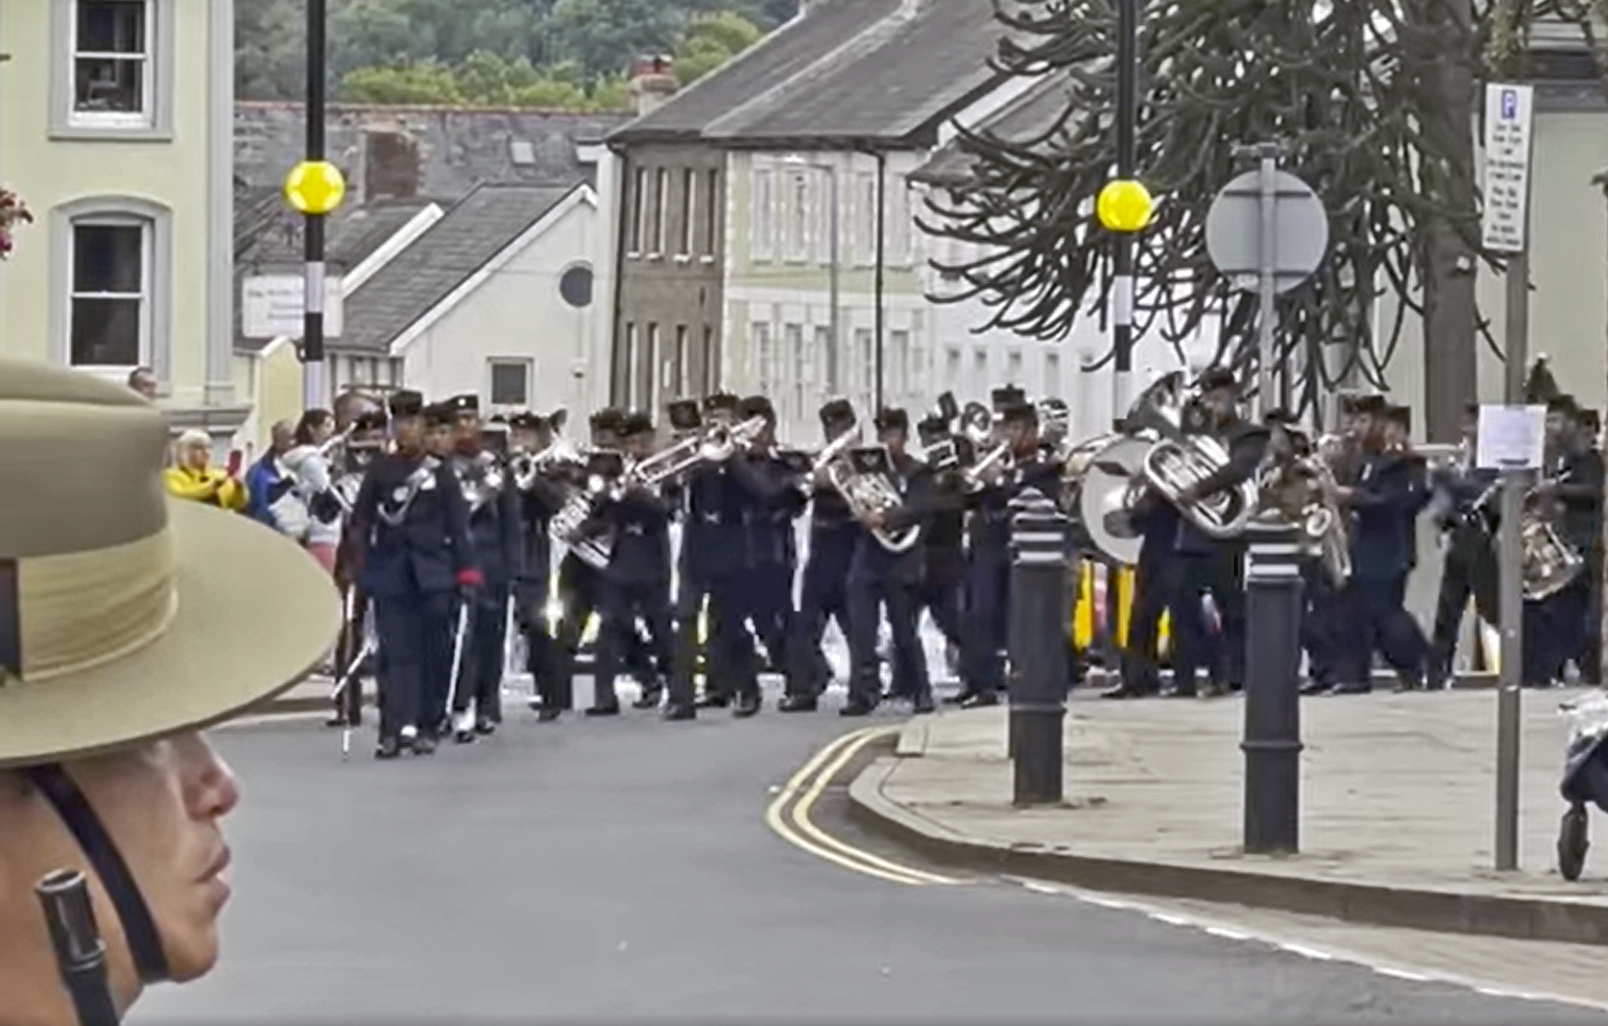 Gurkha soldiers proudly parade in Brecon